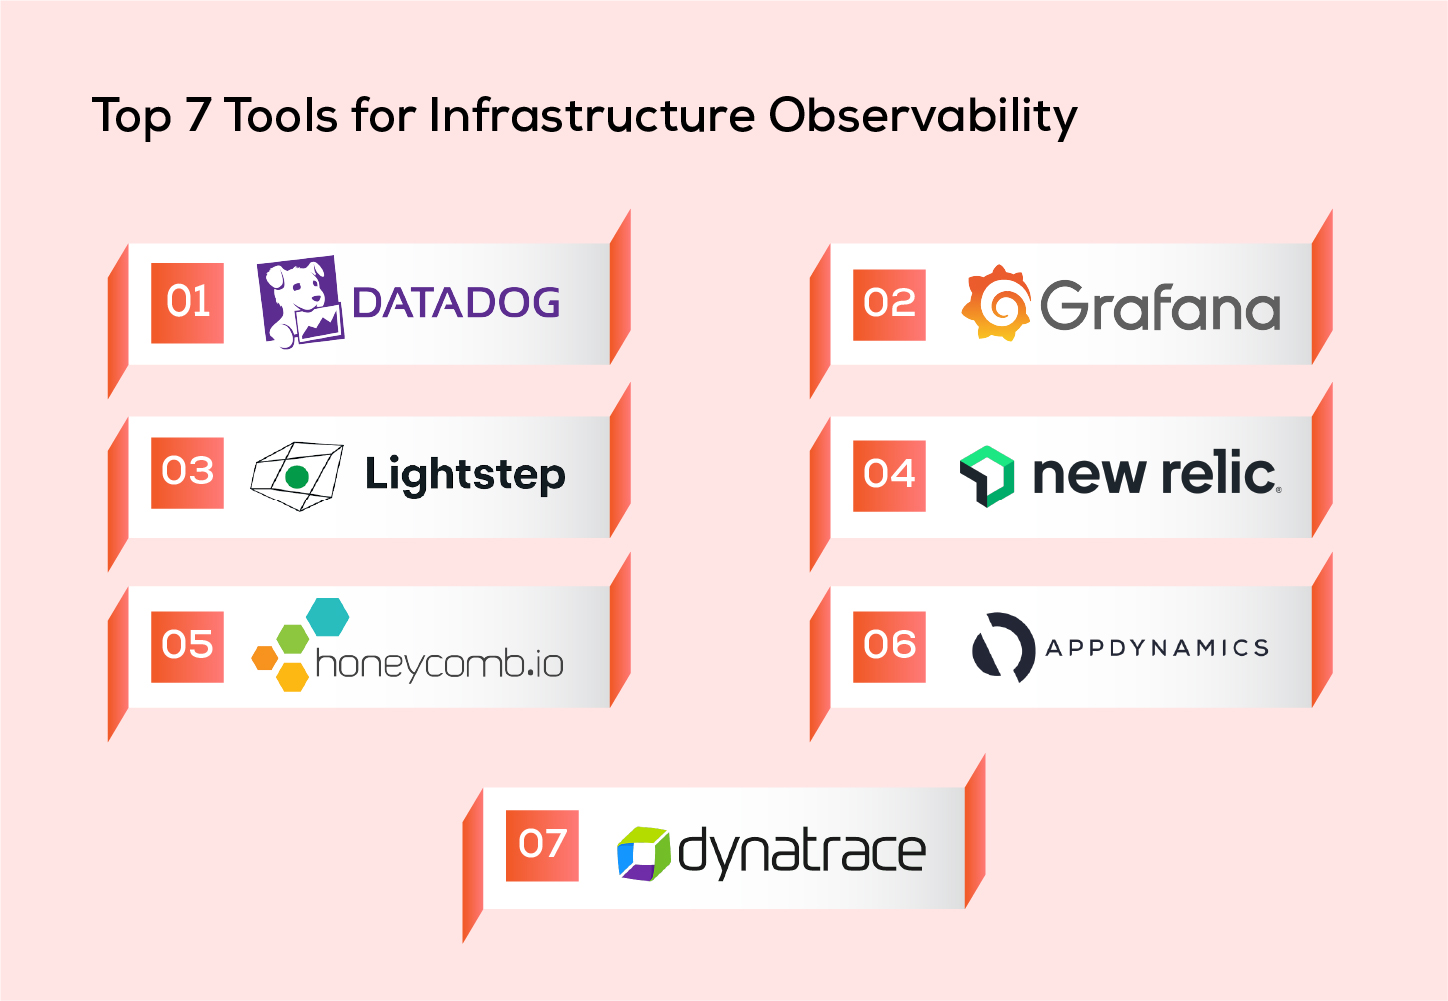 Top 7 Tools for Infrastructure Observability